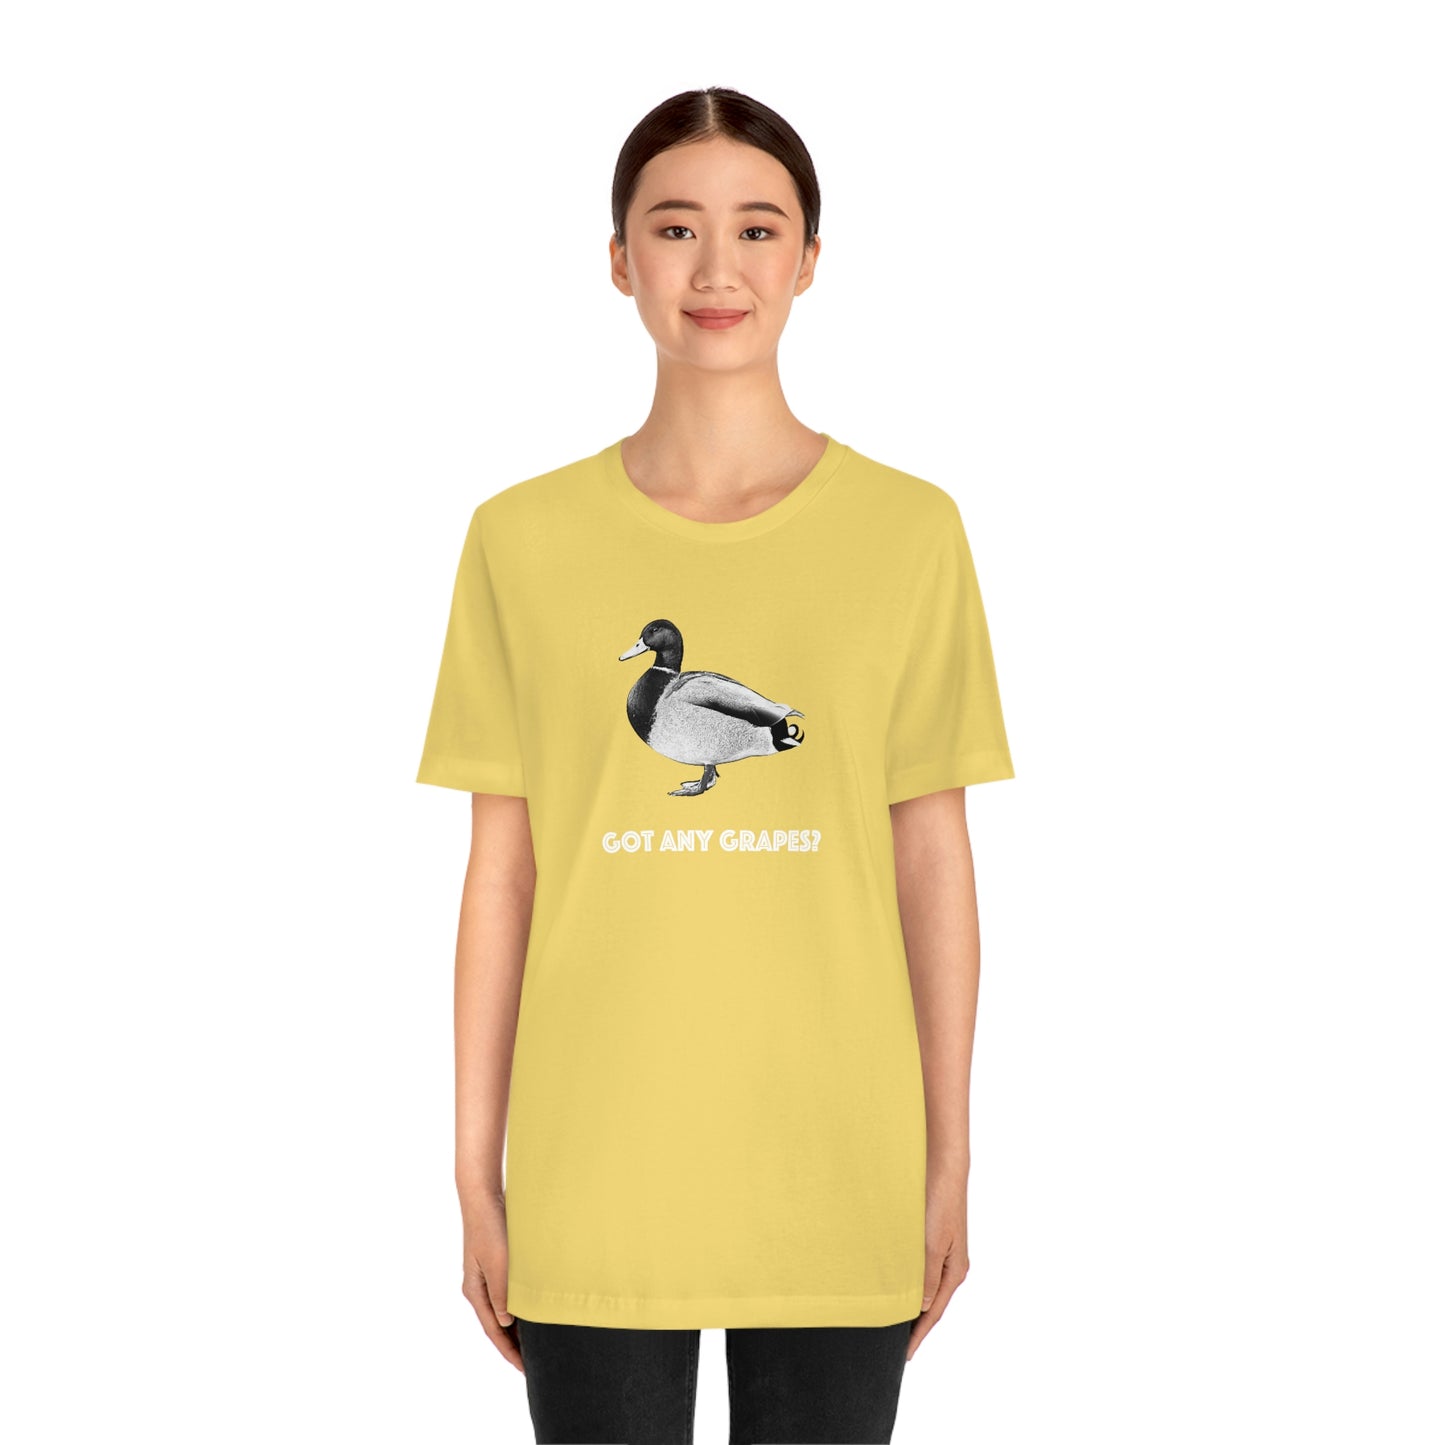 Lunch Therapy - Duck Got Any Grapes? -  Unisex Jersey Short Sleeve Tee